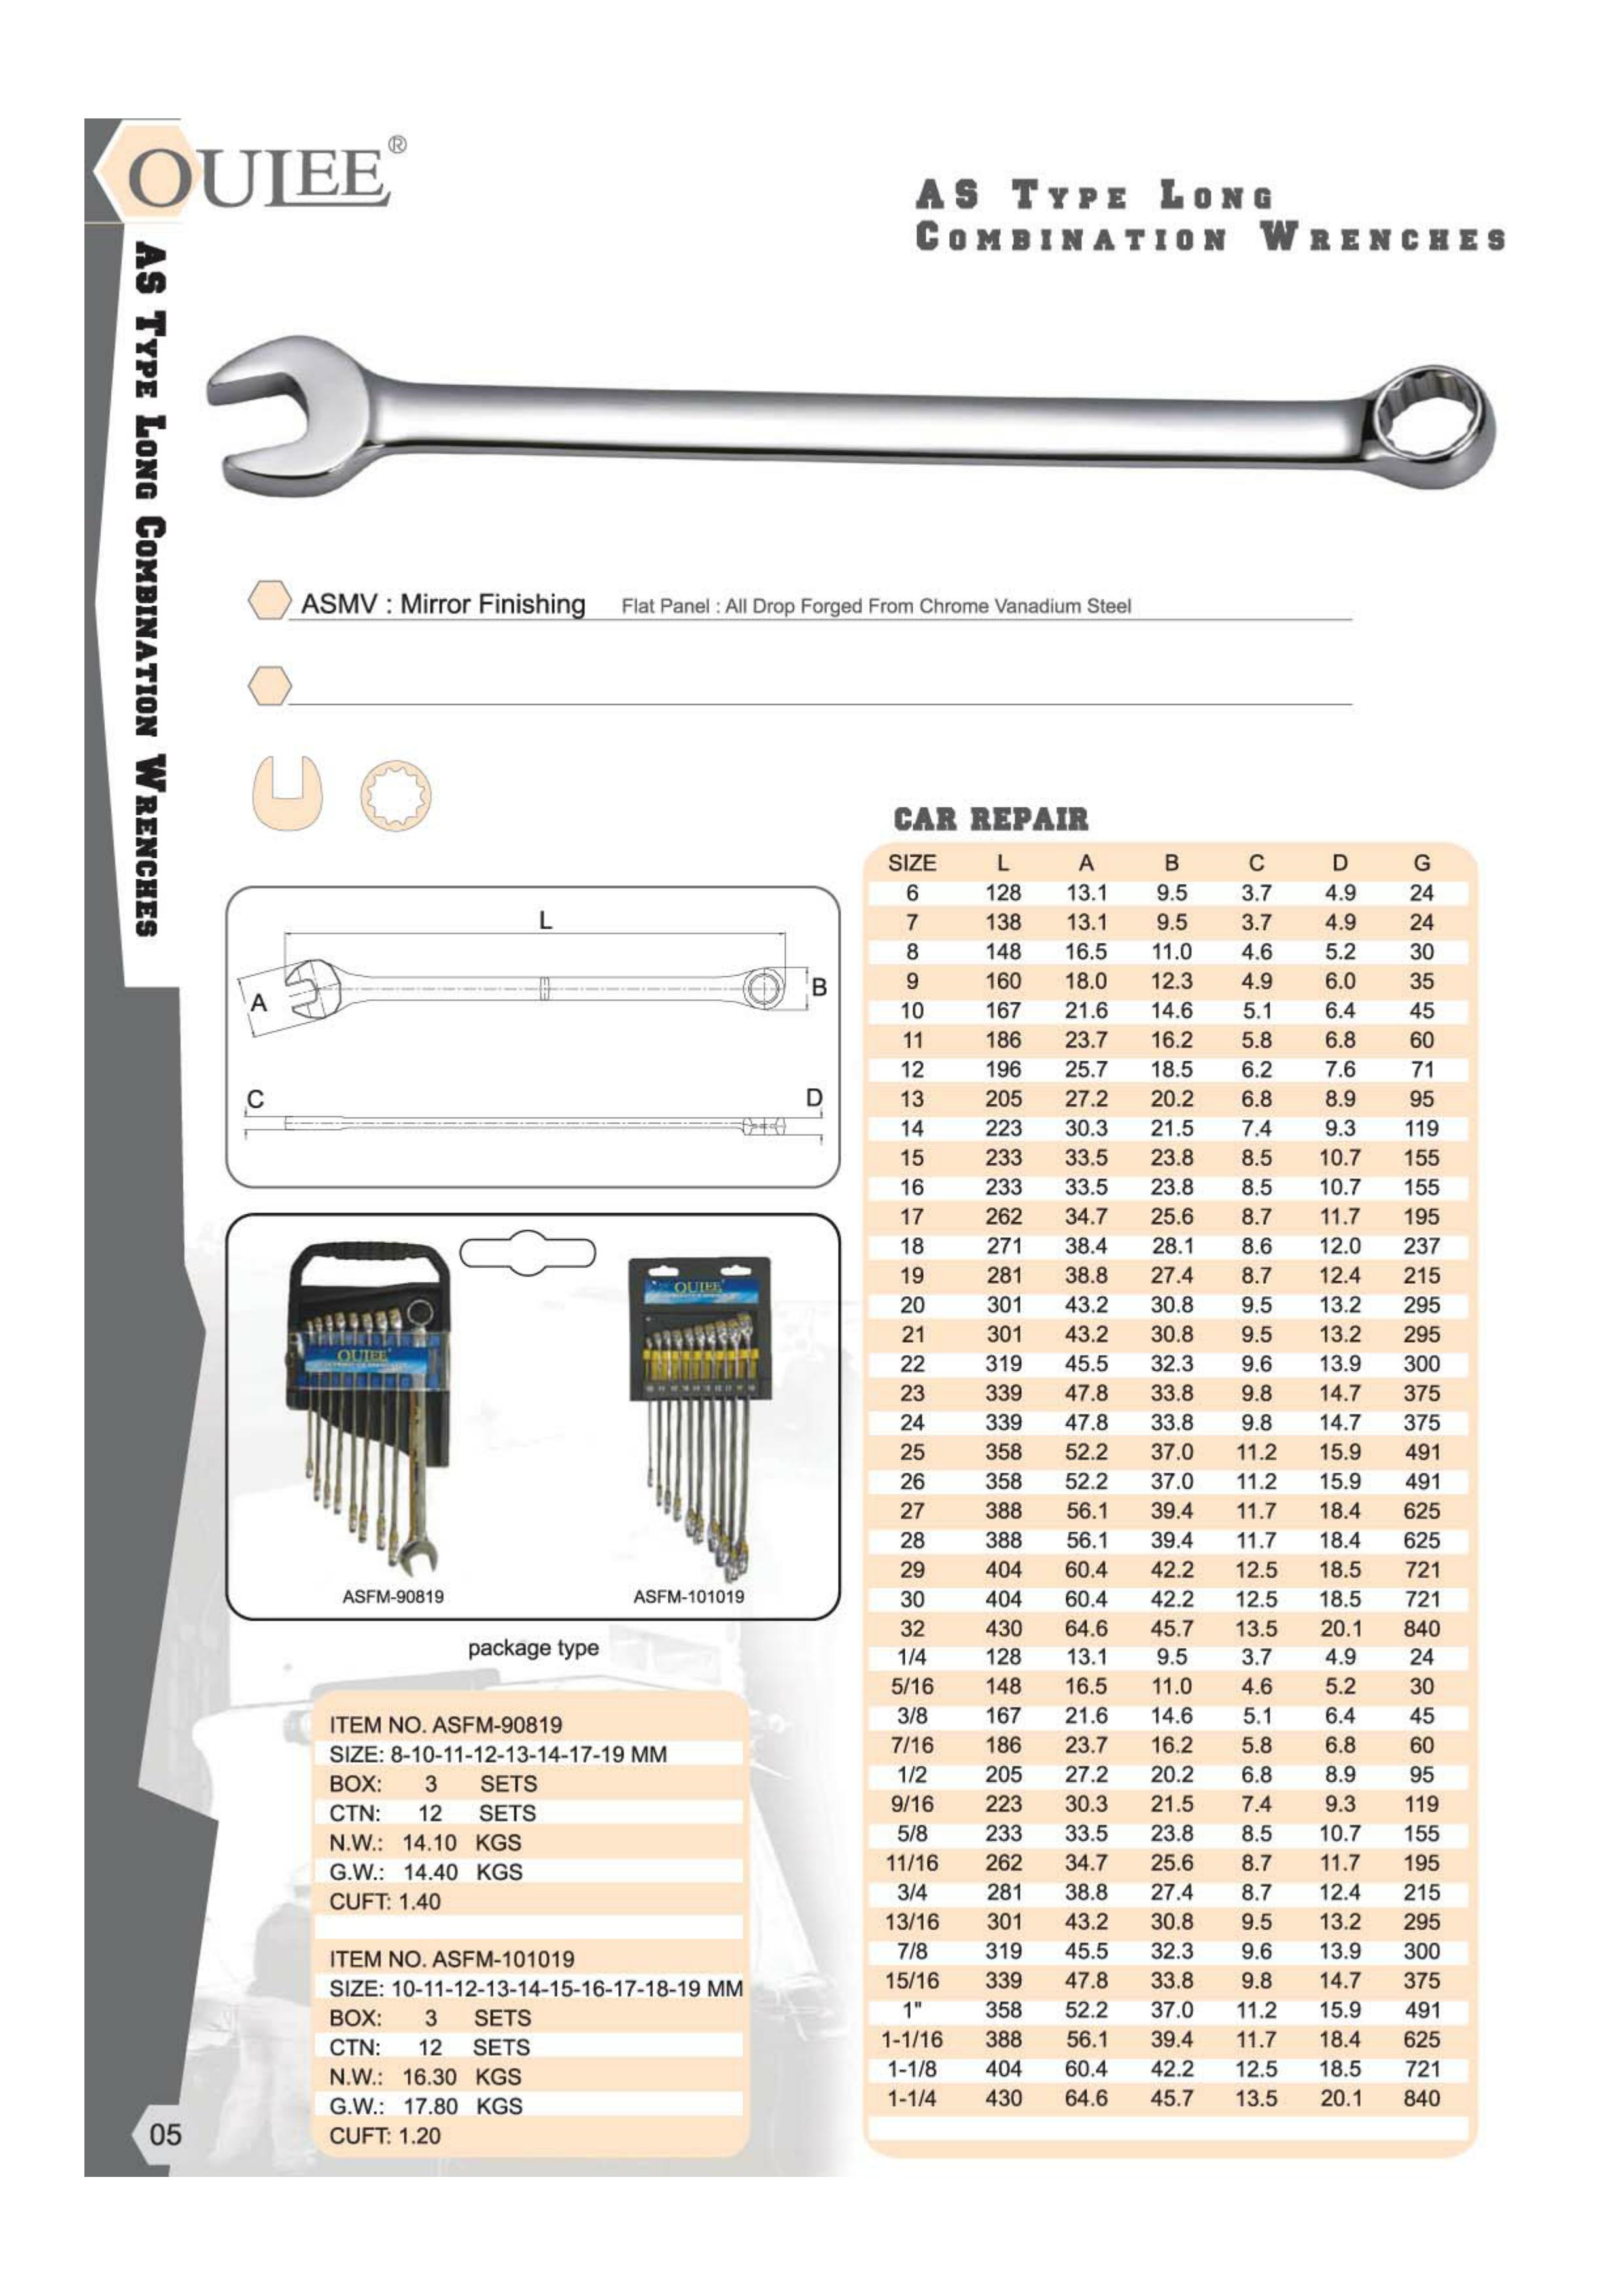 AS type long combination wrenches